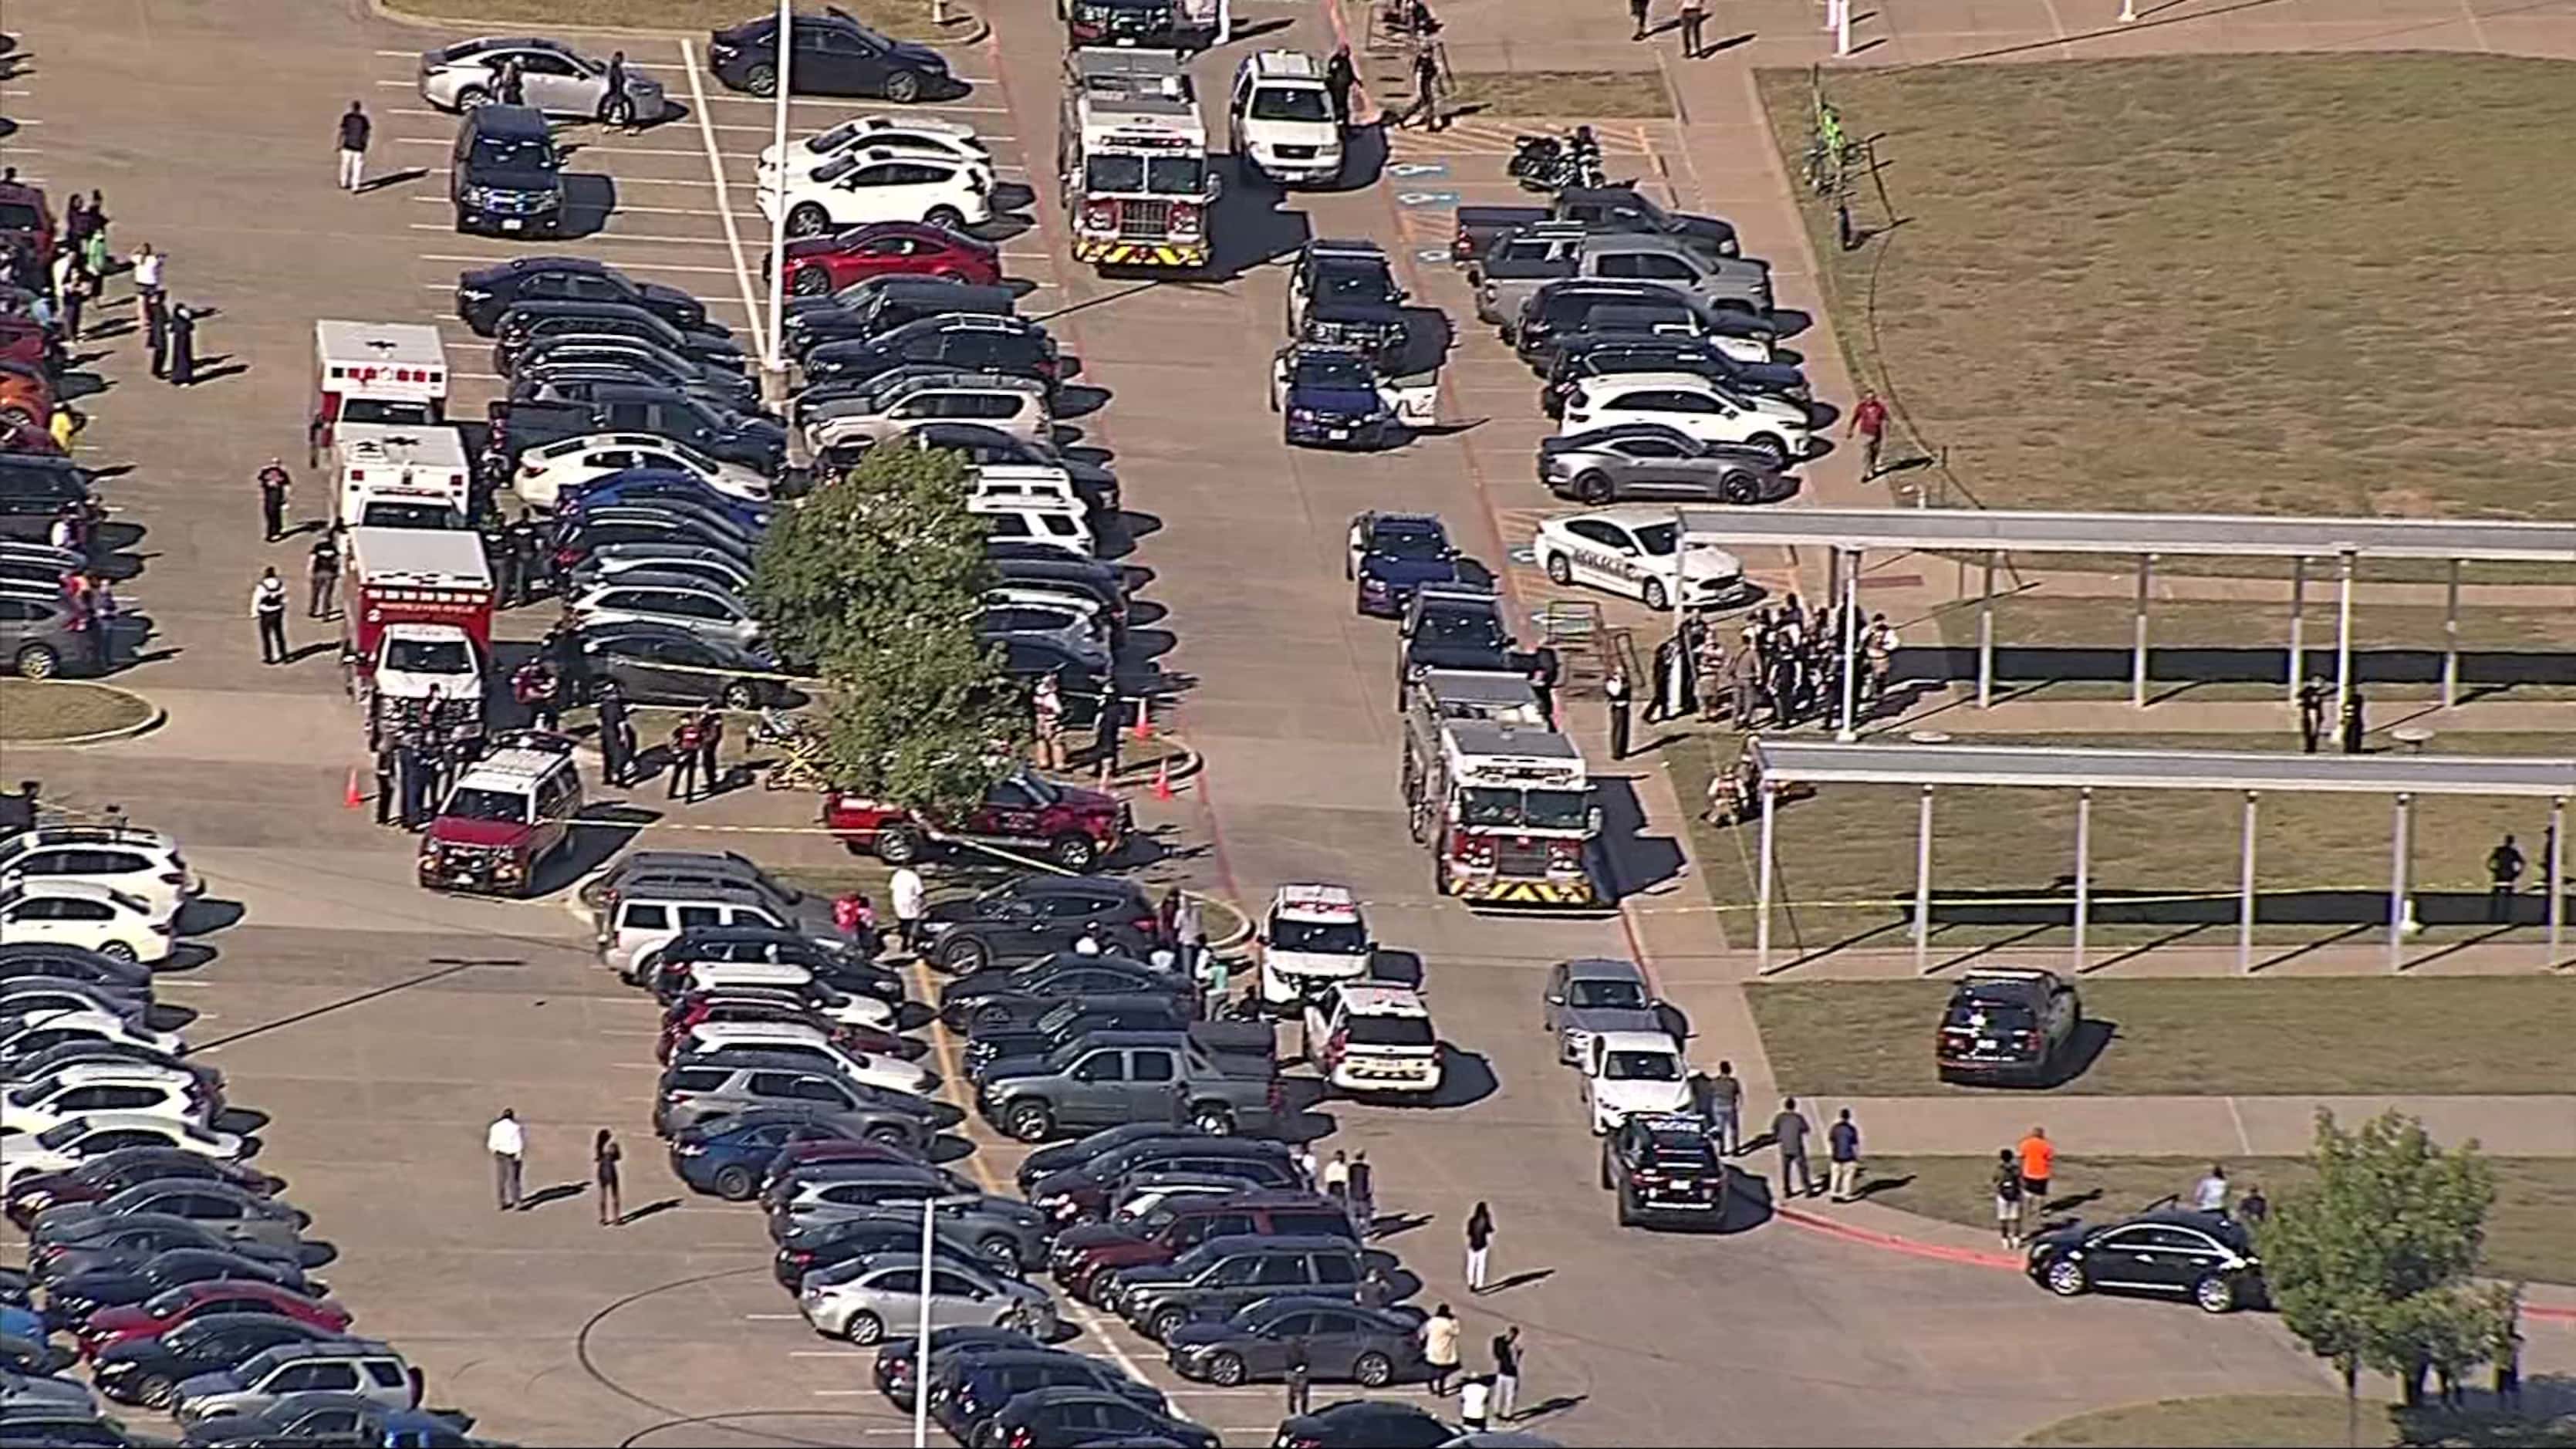 There was a heavy police presence at Timberview High School on Wednesday morning.